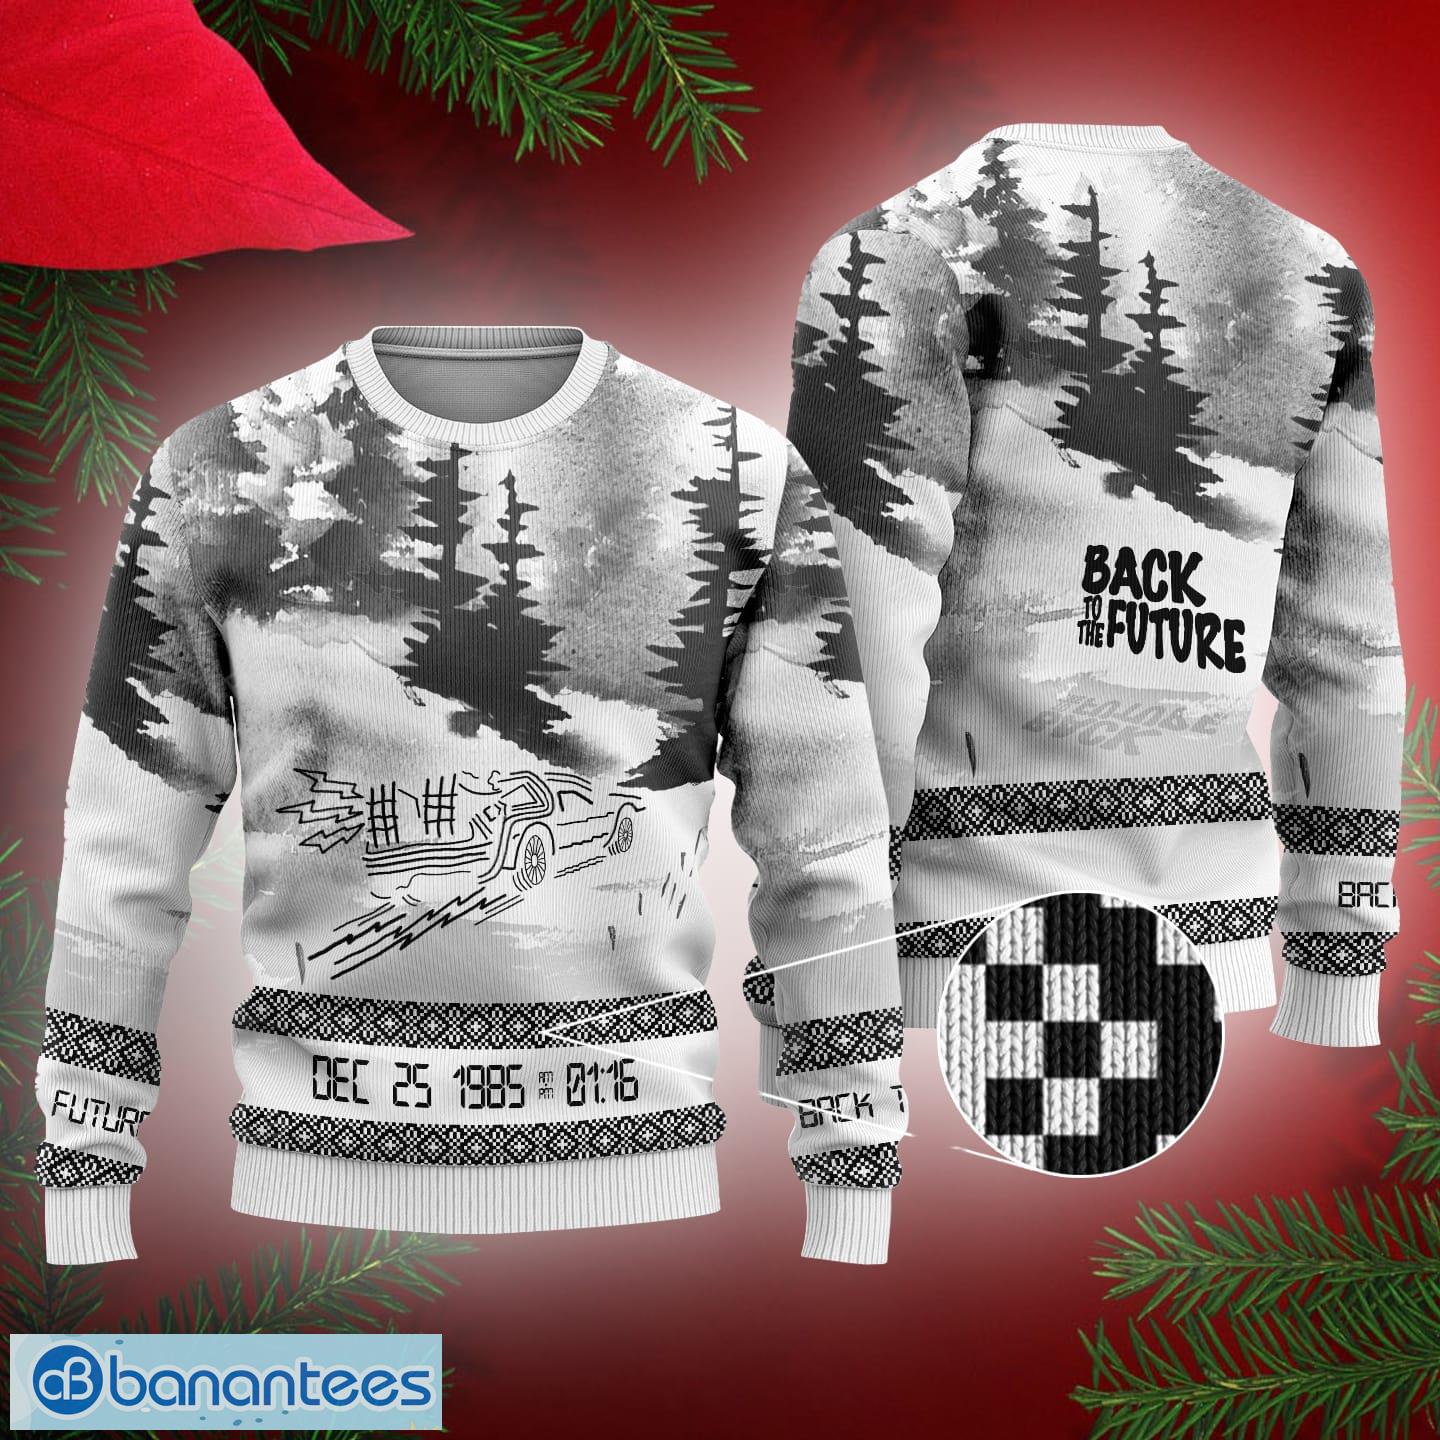 Back To The Future Ugly Christmas Sweater For Men And Women - Back To The Future Ugly Christmas Sweater For Men And Women